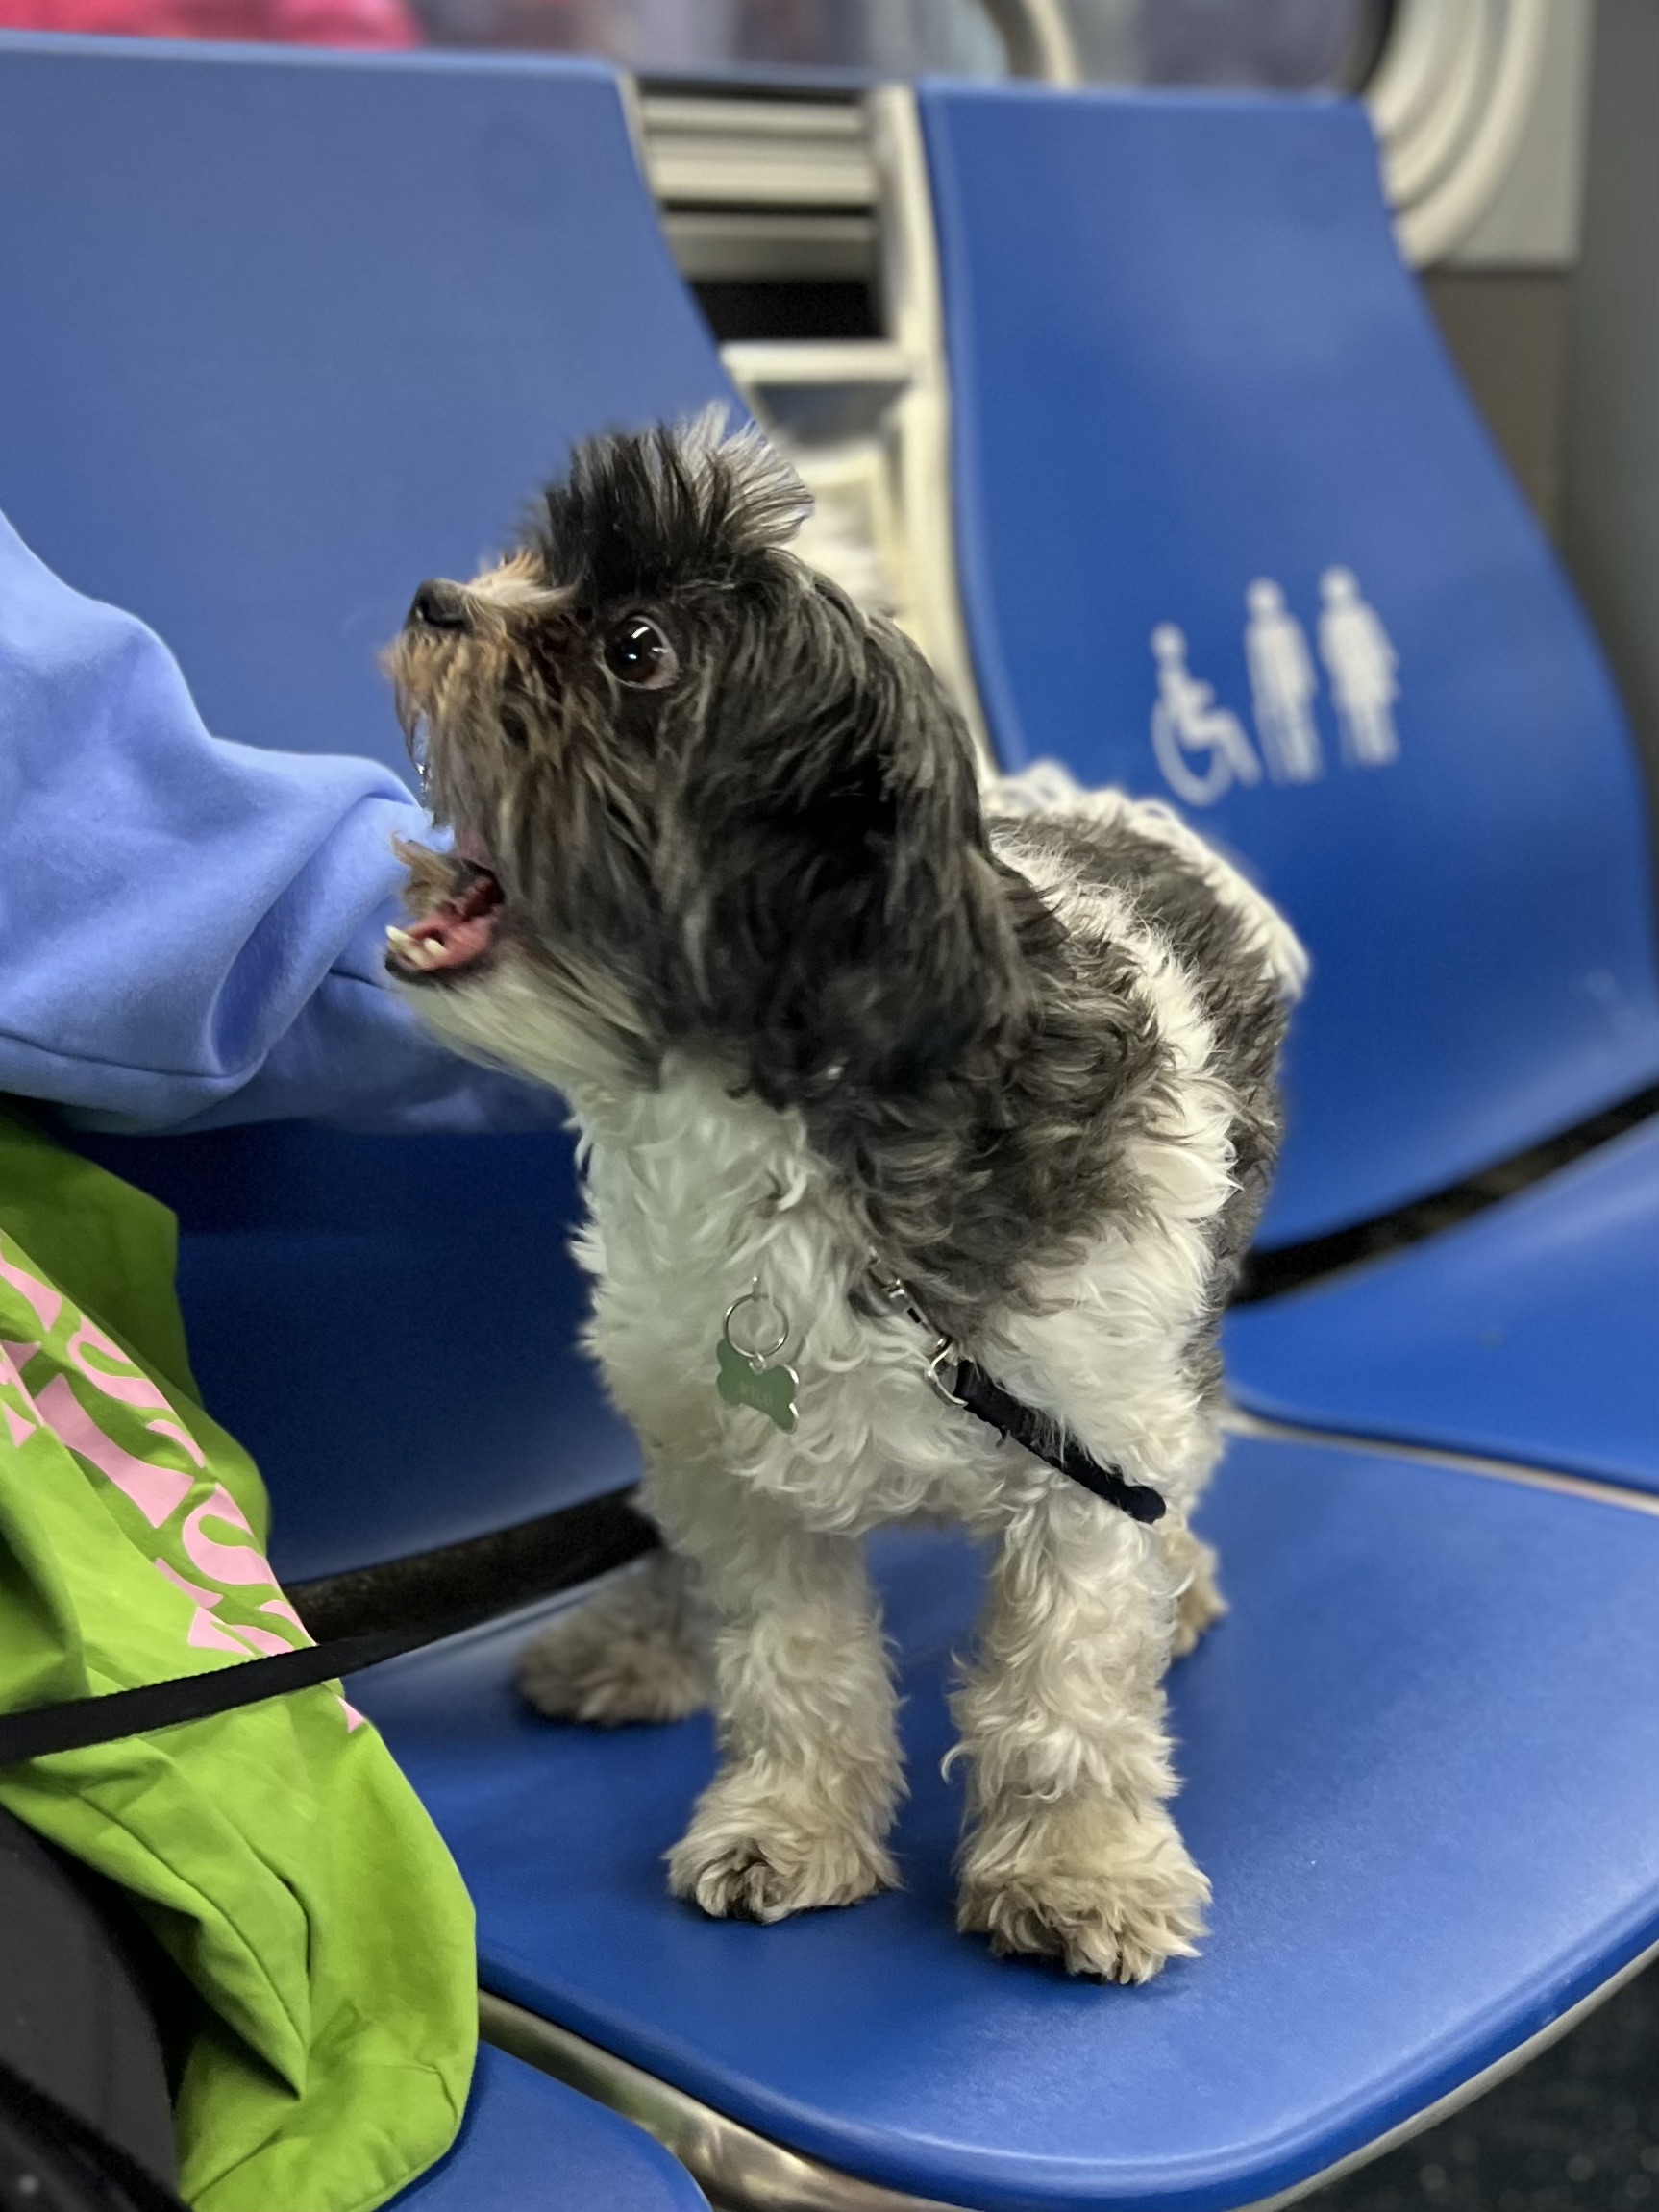 Trimmed Shih Tzu On A Bus Seat